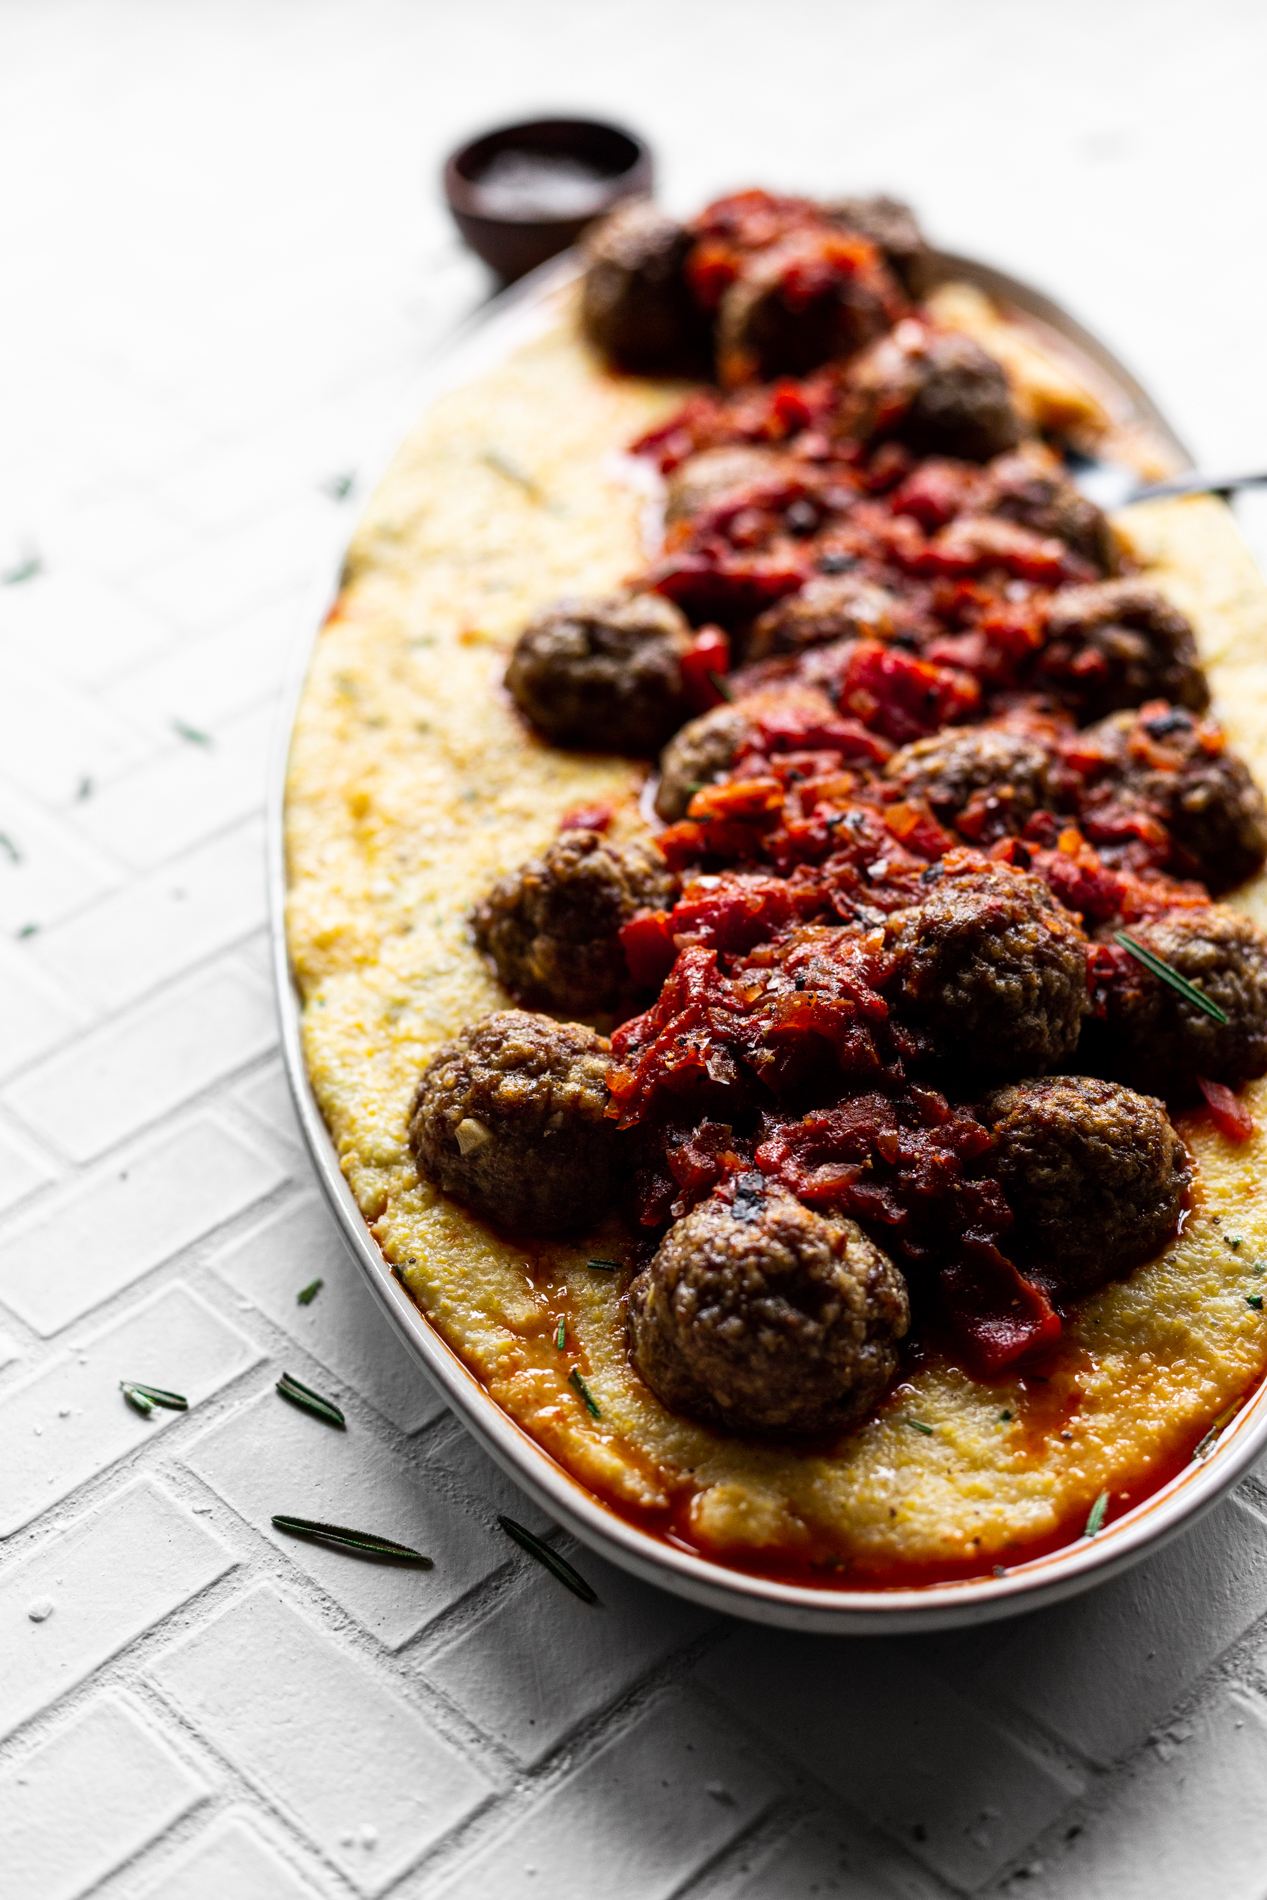 platter full of creamy polenta topped with lamb meatballs in a red pepper sauce